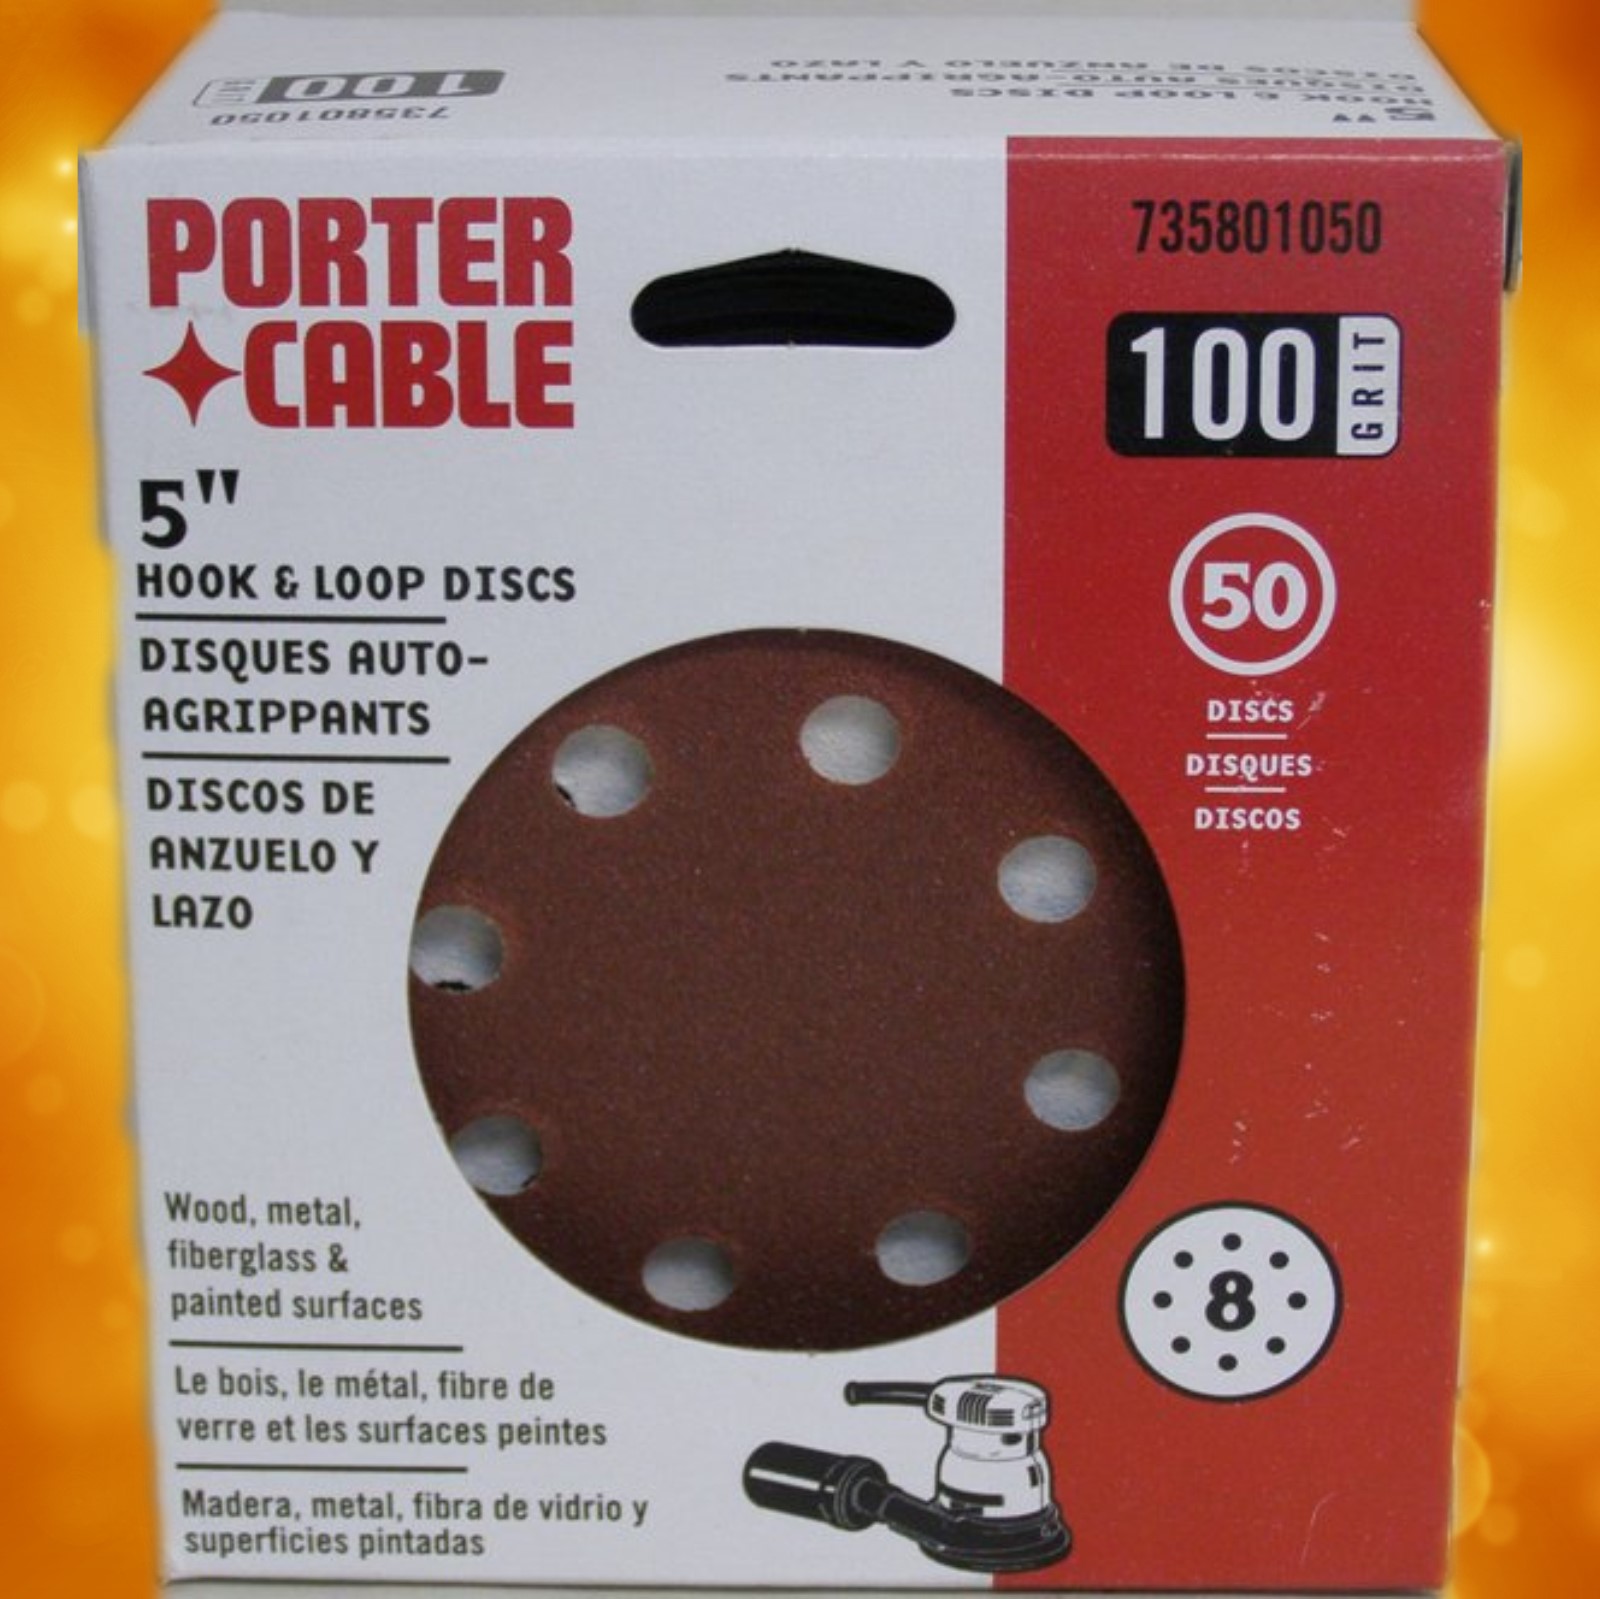 735801050 Porter-Cable 5" Eight-Hole, Hook & Loop Sanding Discs - 100 Grit (50 Pack) 735801050